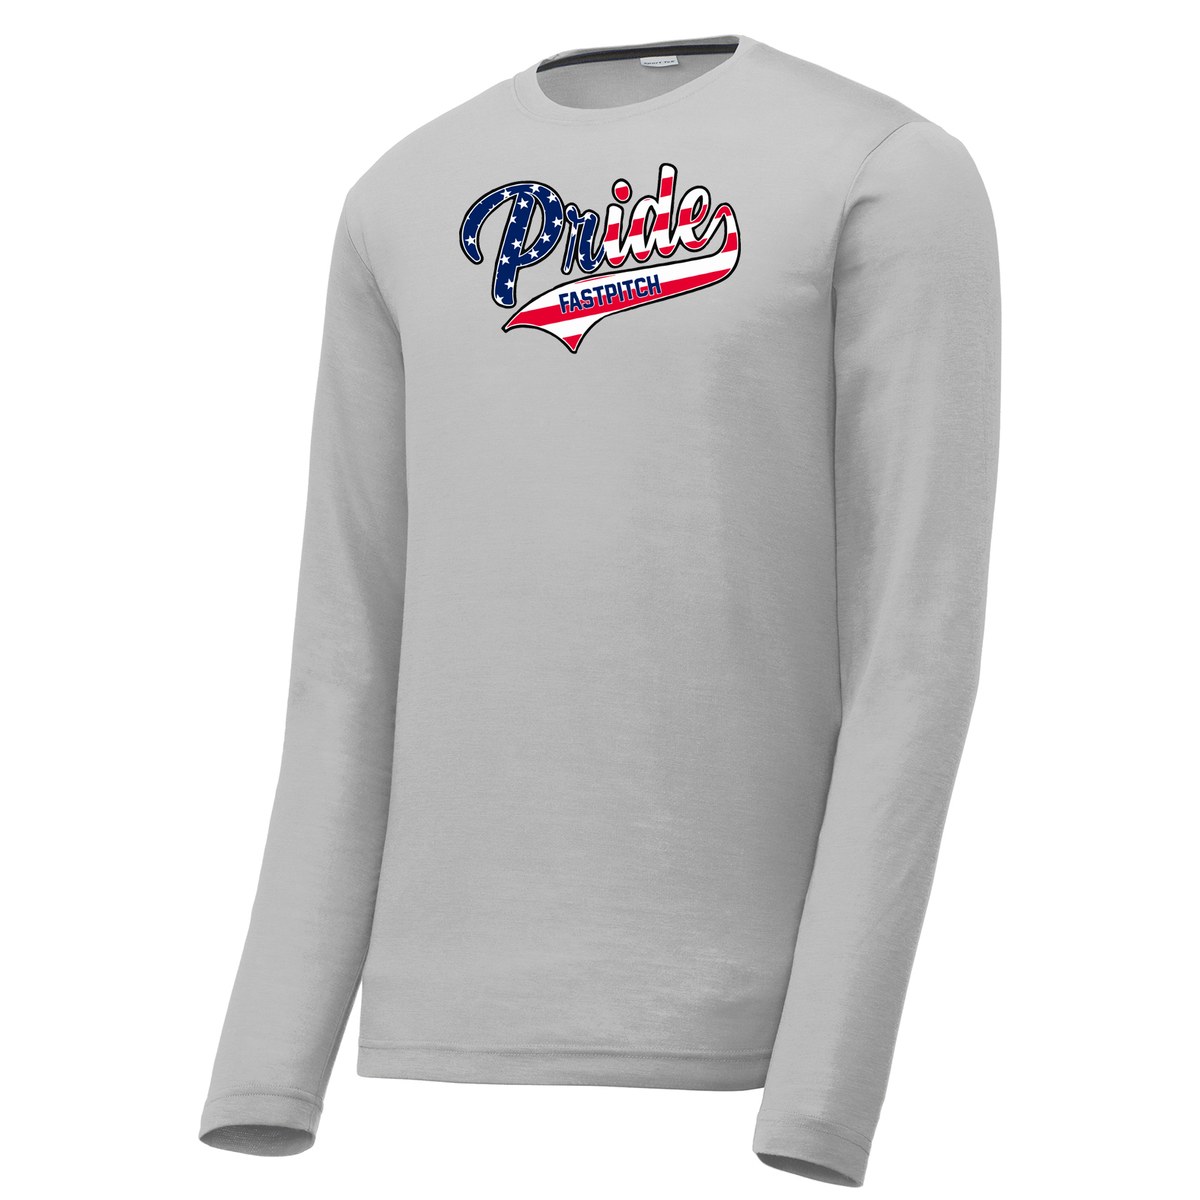 Long Island Pride Fastpitch Long Sleeve CottonTouch Performance Shirt